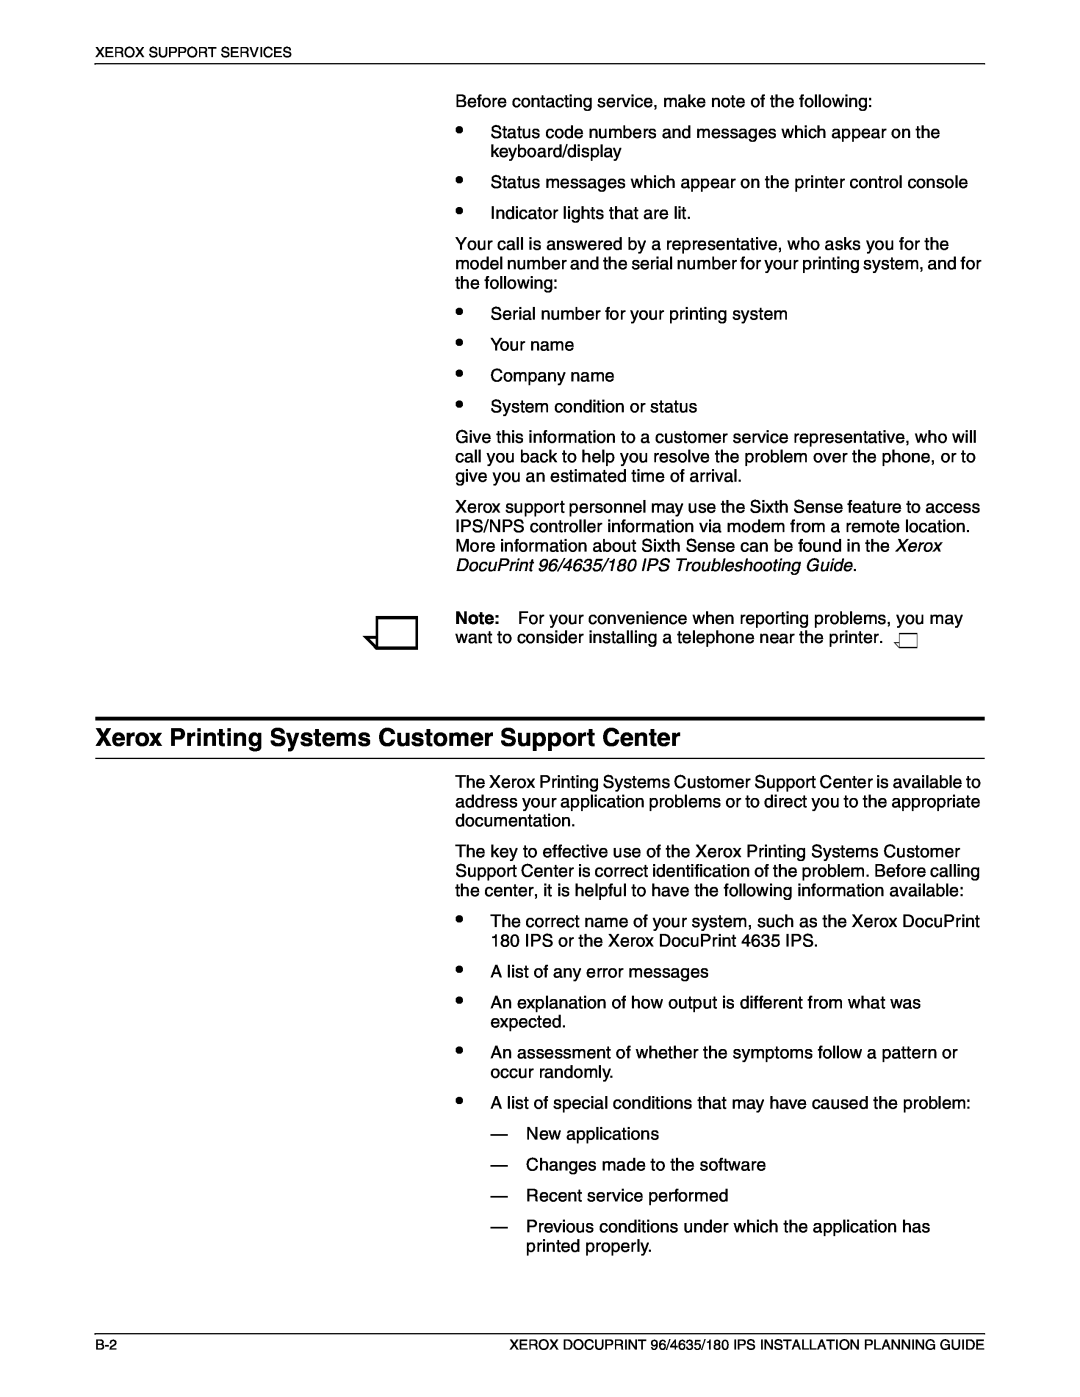 Xerox Xerox Printing Systems Customer Support Center, DocuPrint 96/4635/180 IPS Troubleshooting Guide, • • • • 